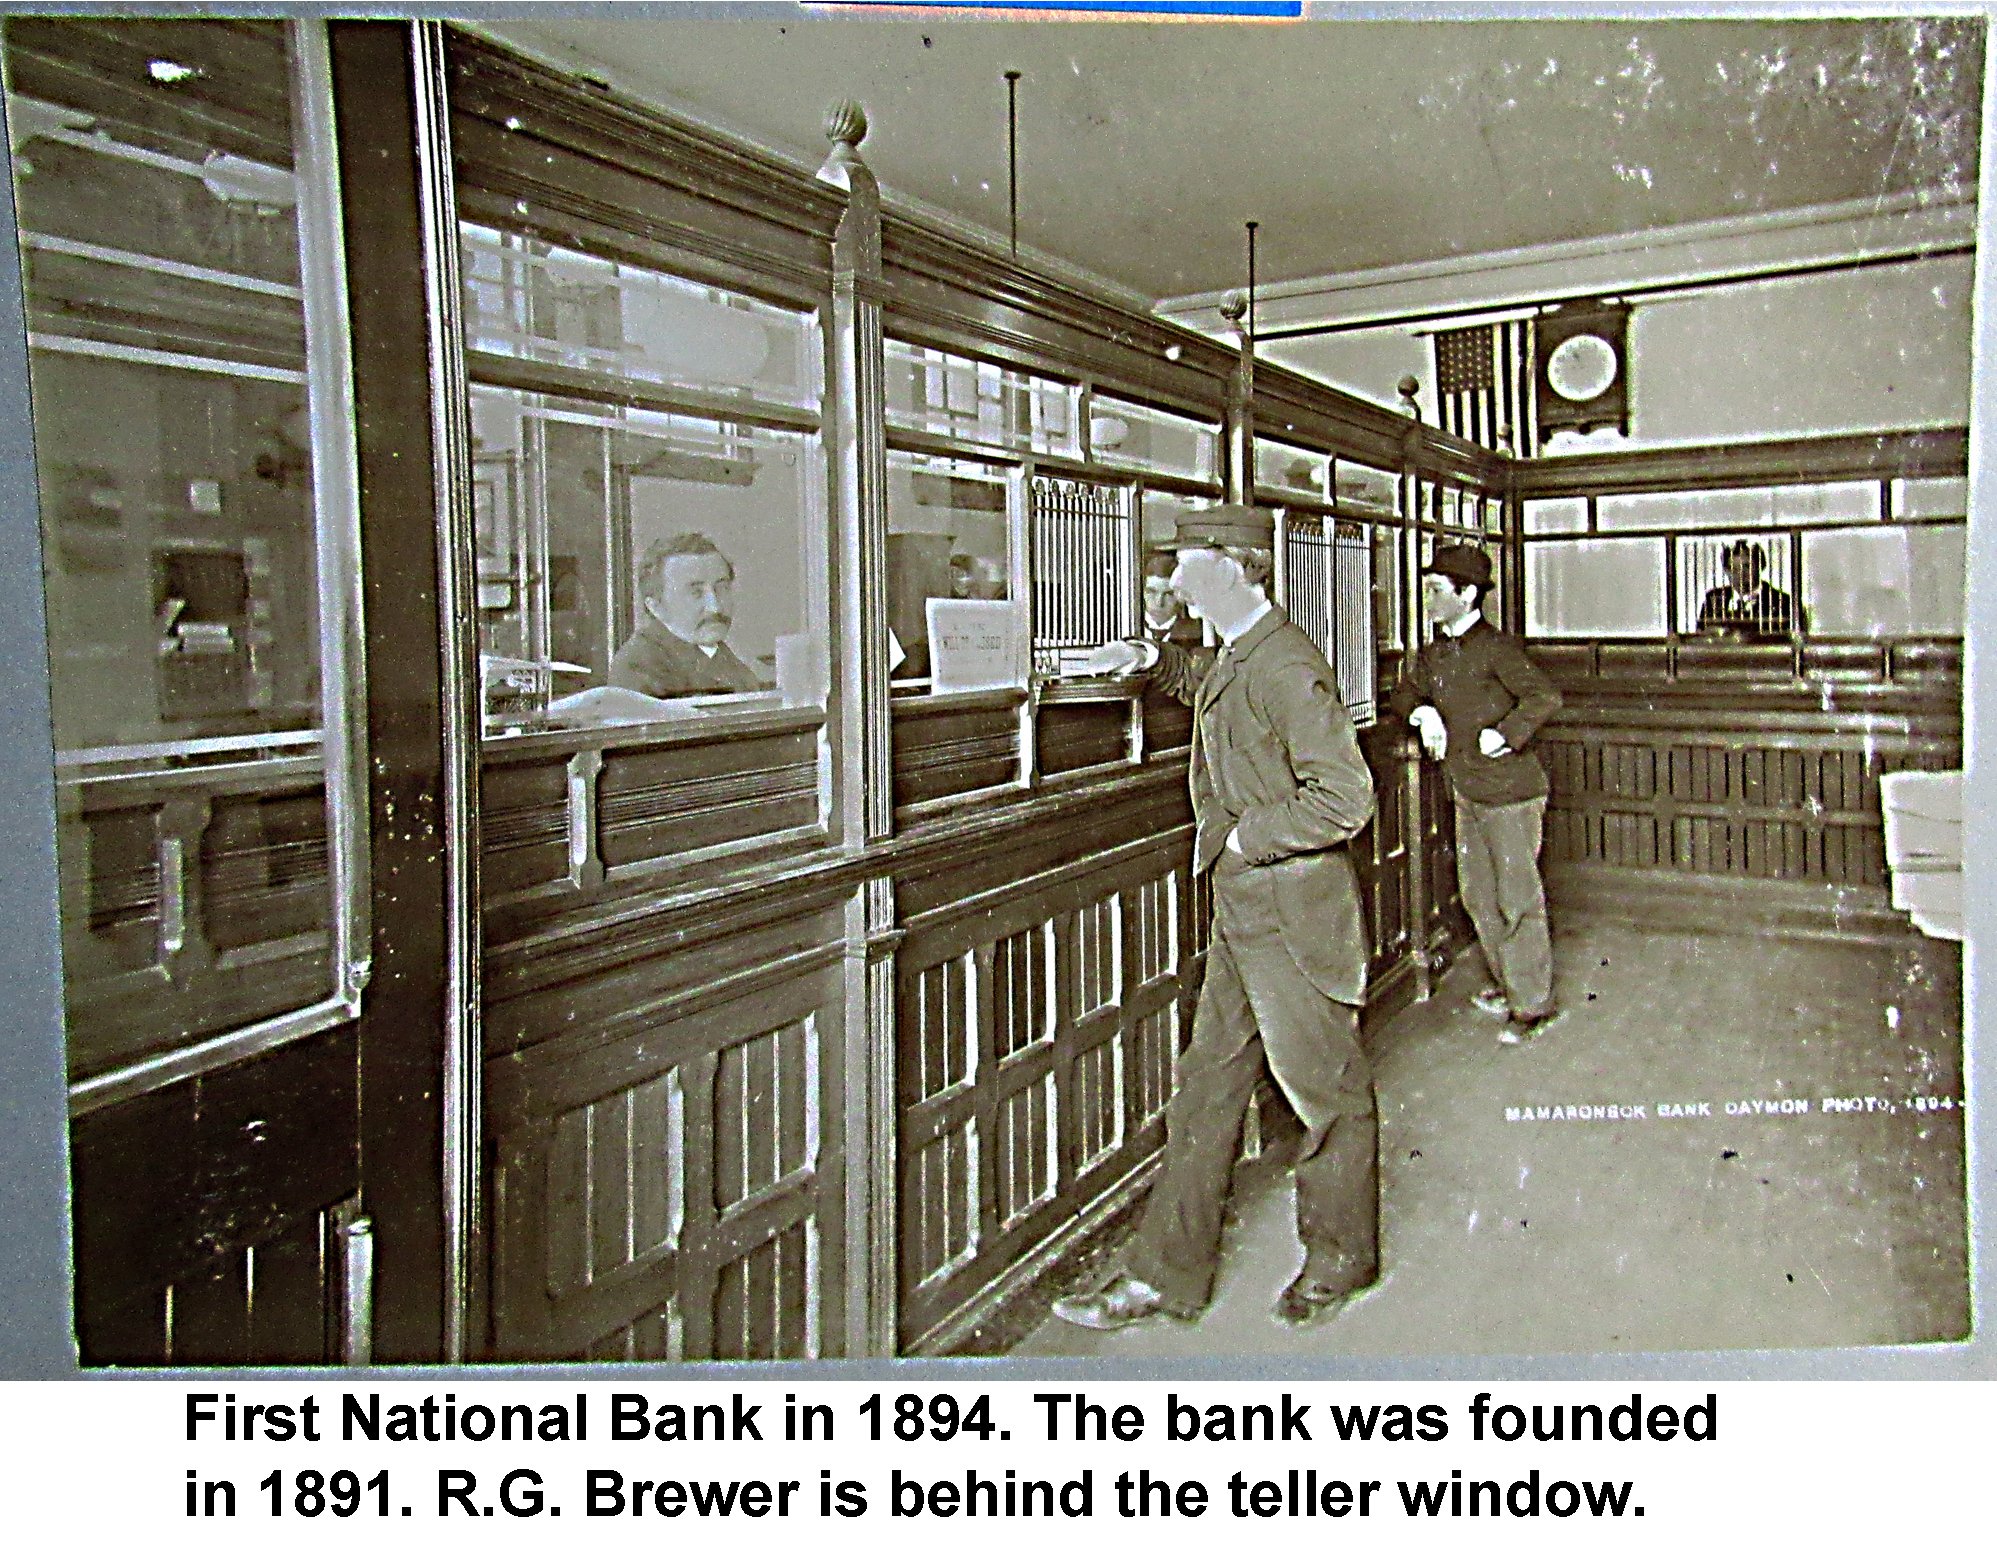 WD-02  First National Bank in 1894 founded 1891 R.G. Brewer behind teller window captioned.jpg